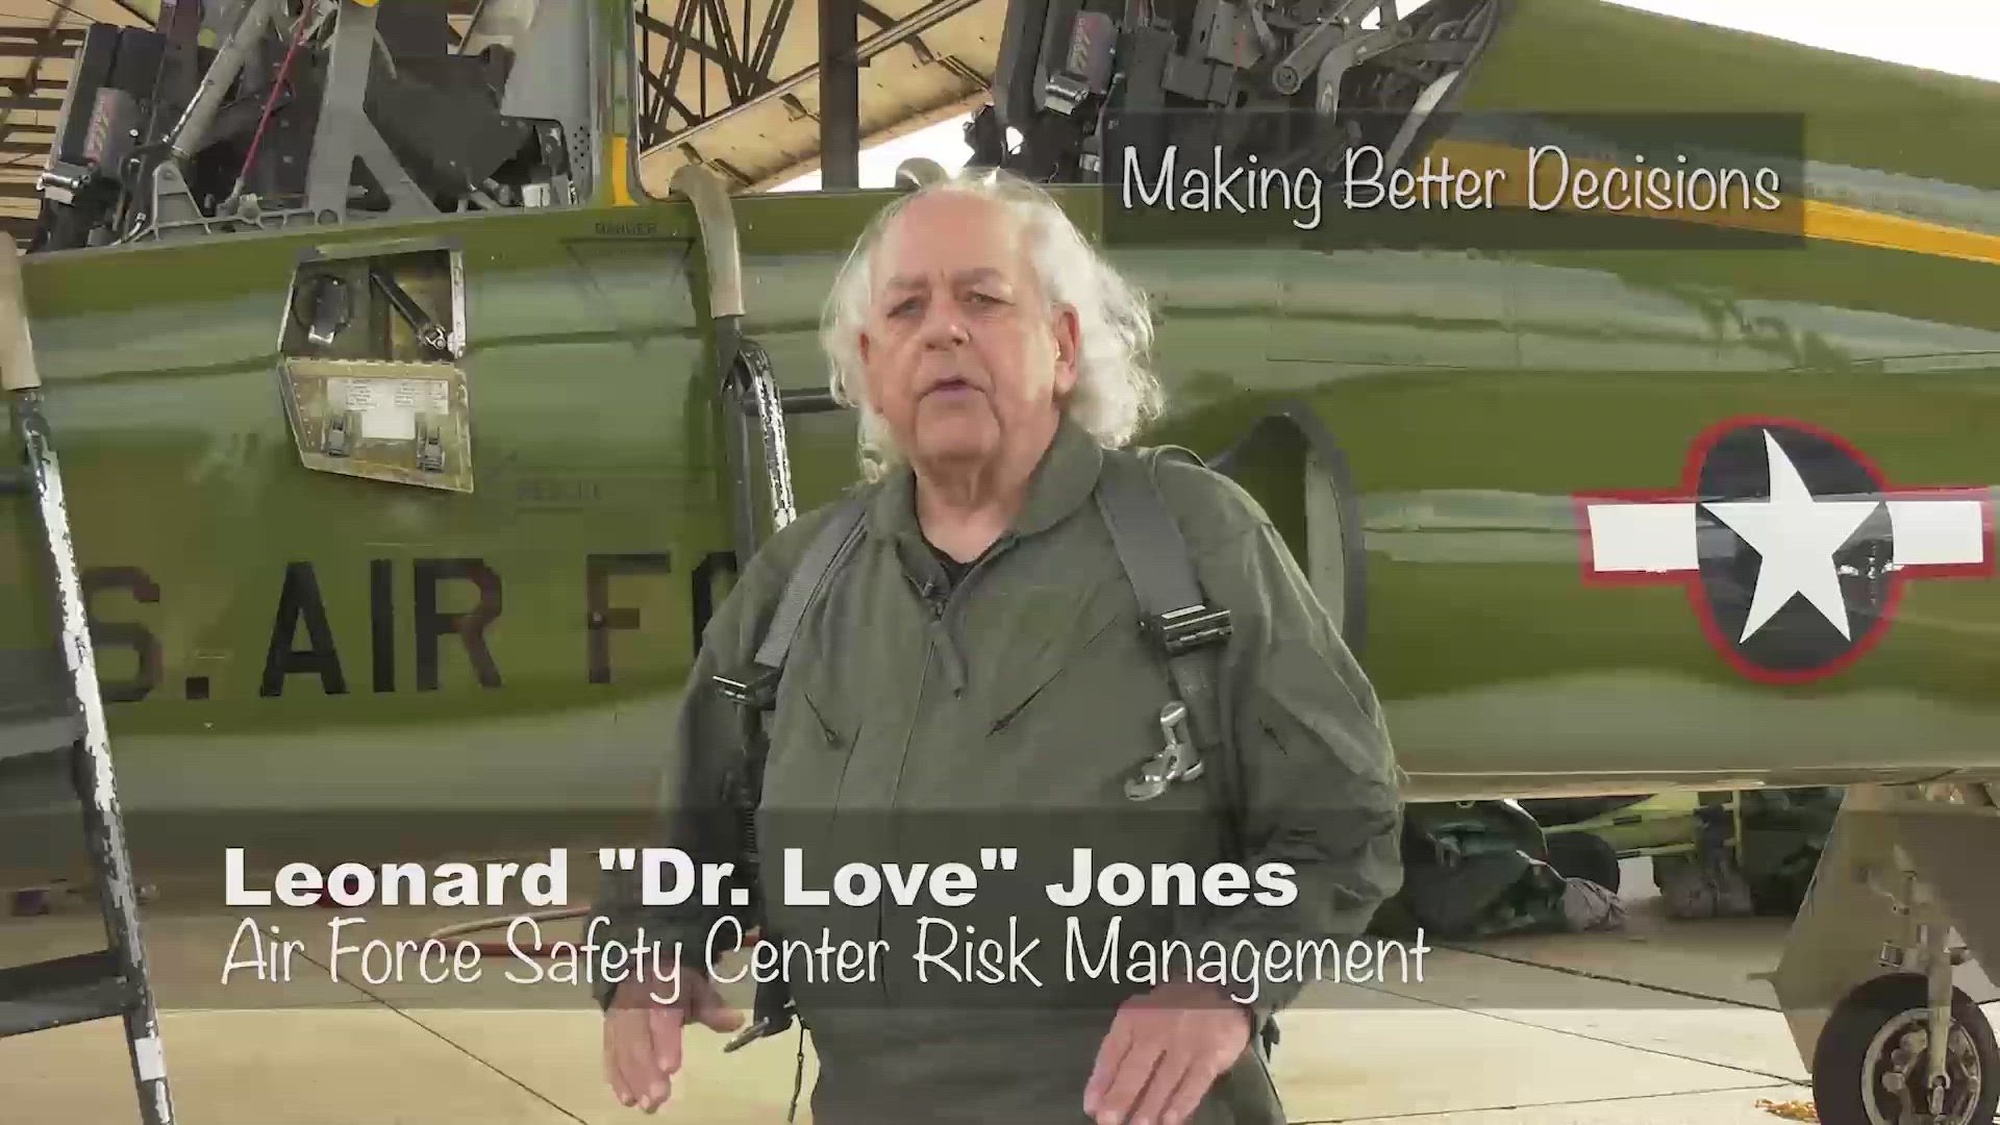 In this commercial "Dr. Love" shares his view on choices as he looks to take an orientation flight in a T-38 Talon. He reminds viewers that they should continually re-evaluate their decisions as new information becomes available. Don't be afraid to change your mind or pressured by peers if you don't feel safe. (U.S. Air Force video by Keith Wright)